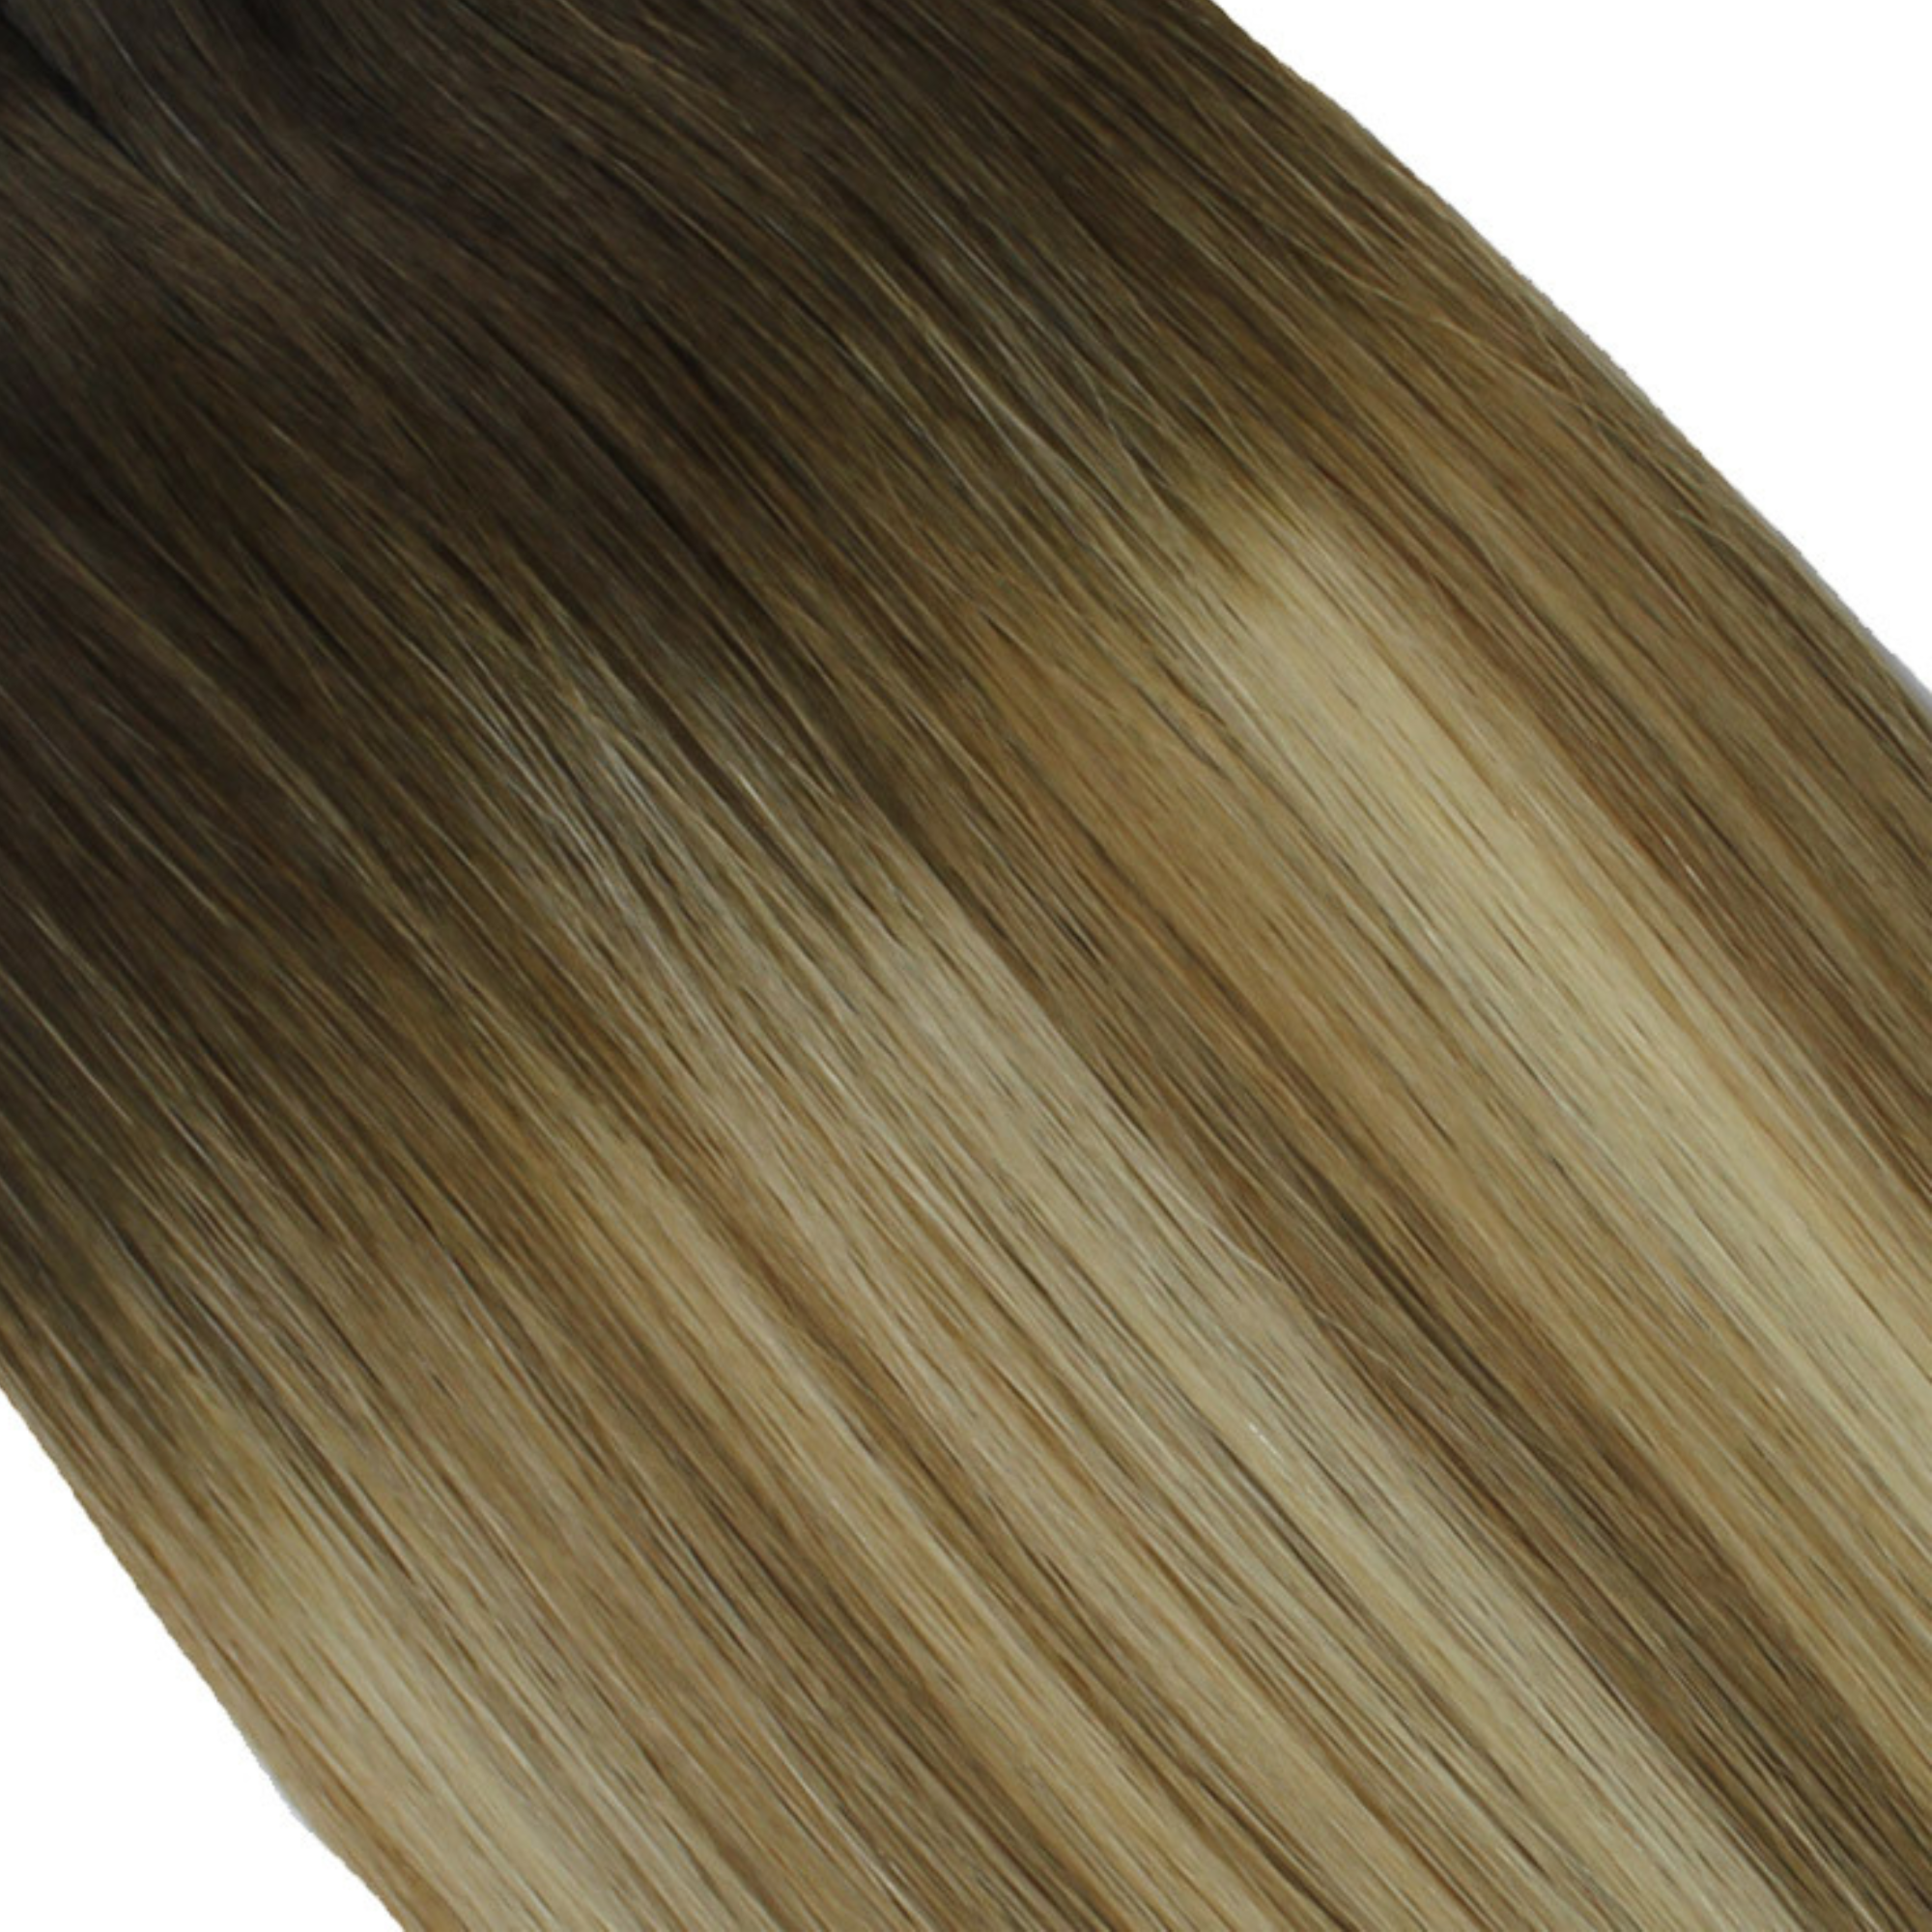 "hair rehab london 18" length 120 grams weight original clip-in hair extensions shade titled rooted supermodel"